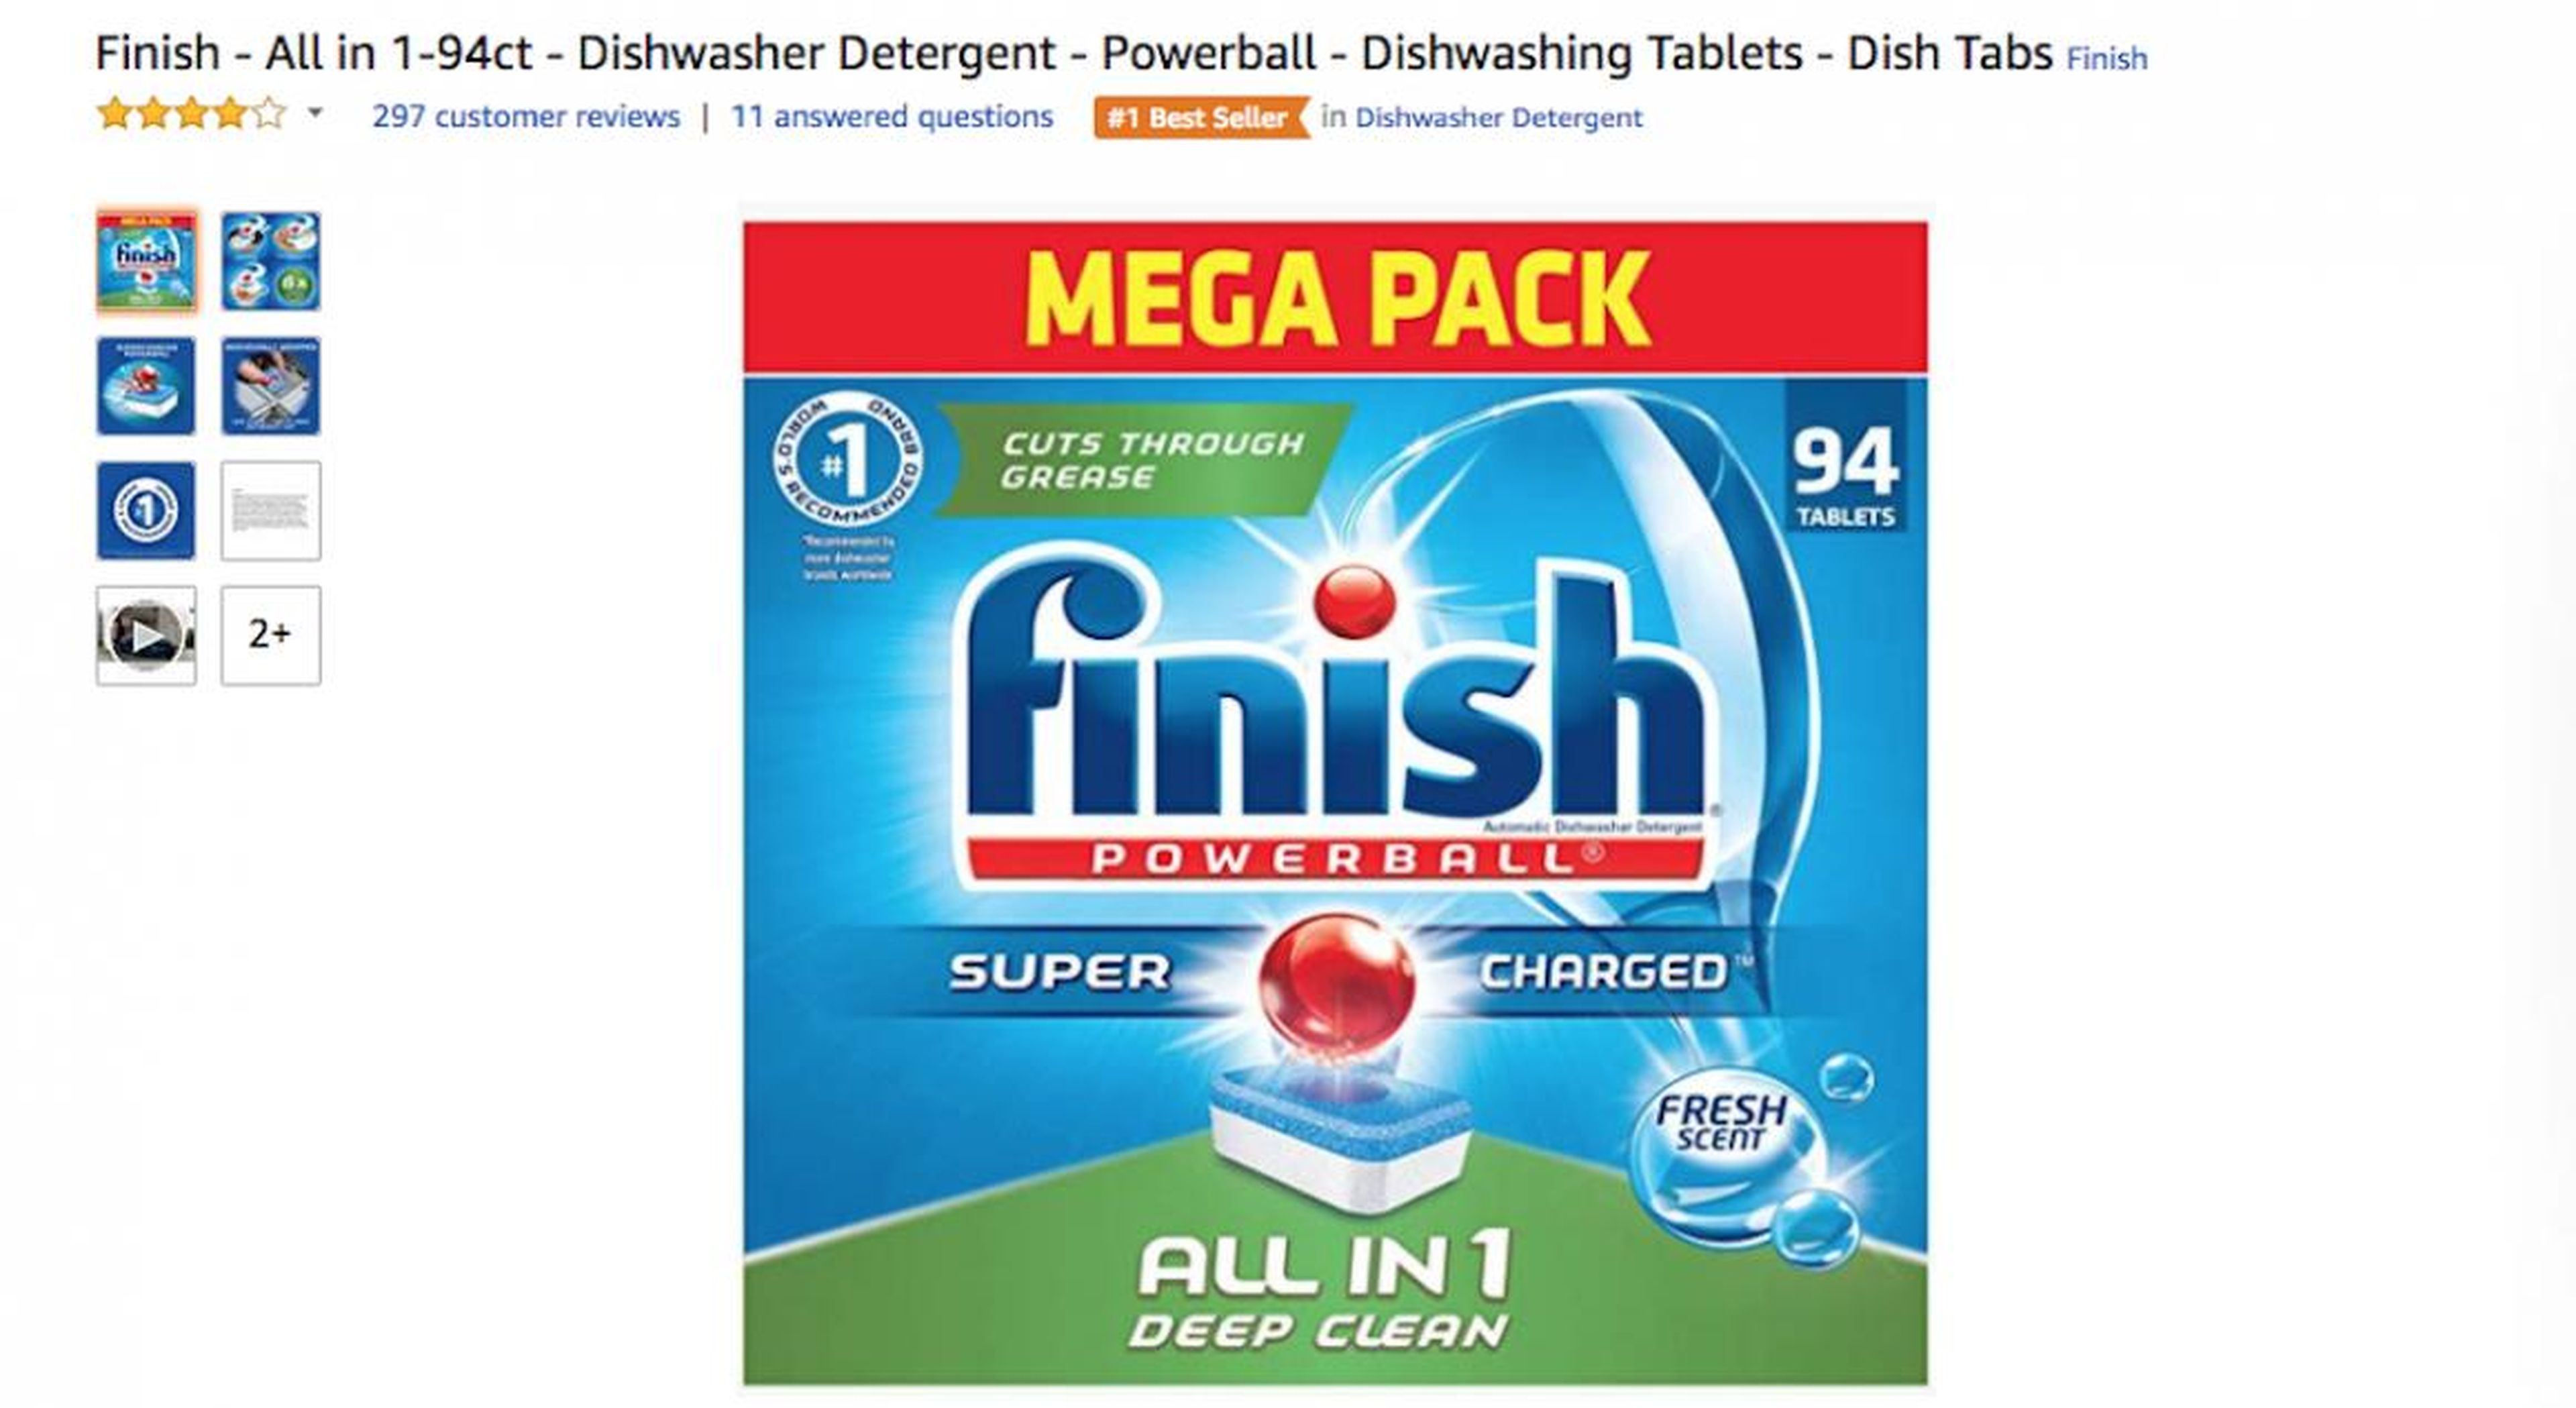 Italy: <a href="https://amzn.to/2zPRAqb">Finish Dishwasher Tabs All in 1 Max</a> were a top seller in Italy.